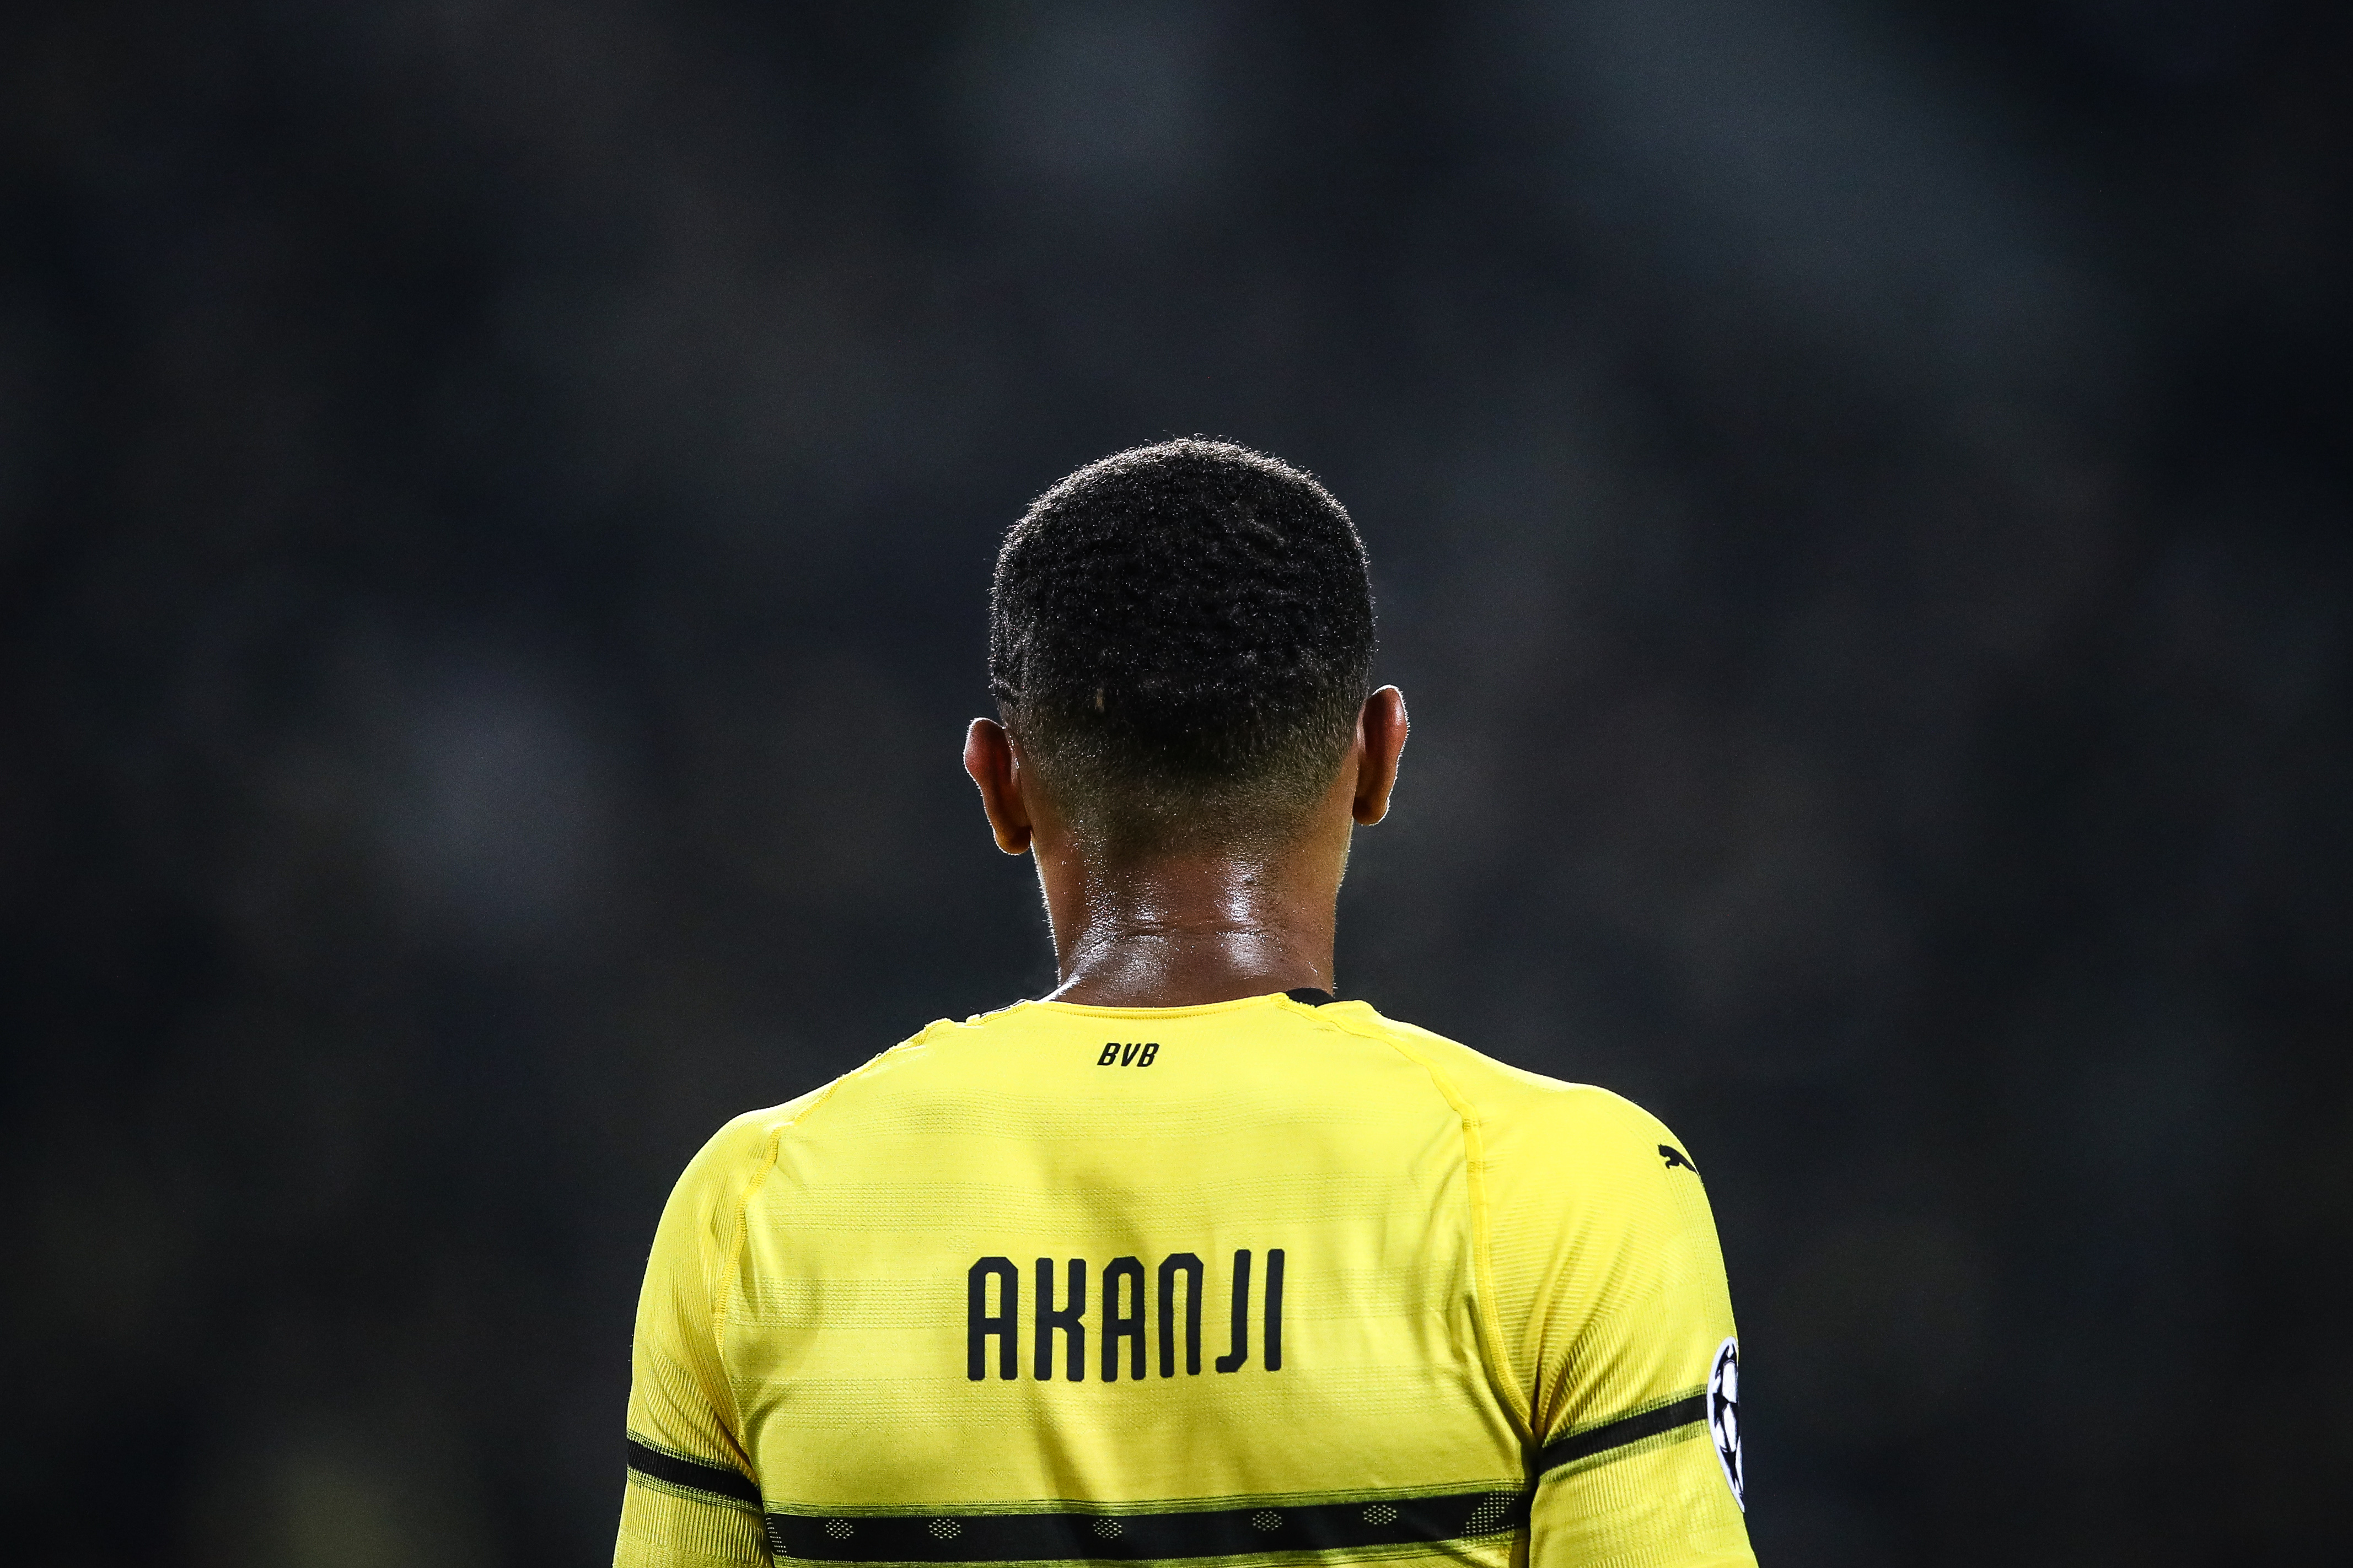 DORTMUND, GERMANY - OCTOBER 03: Manuel Akanji #16 of Borussia Dortmund looks on during the Group A match of the UEFA Champions League between Borussia Dortmund and AS Monaco at Signal Iduna Park on October 3, 2018 in Dortmund, Germany. (Photo by Maja Hitij/Bongarts/Getty Images,)